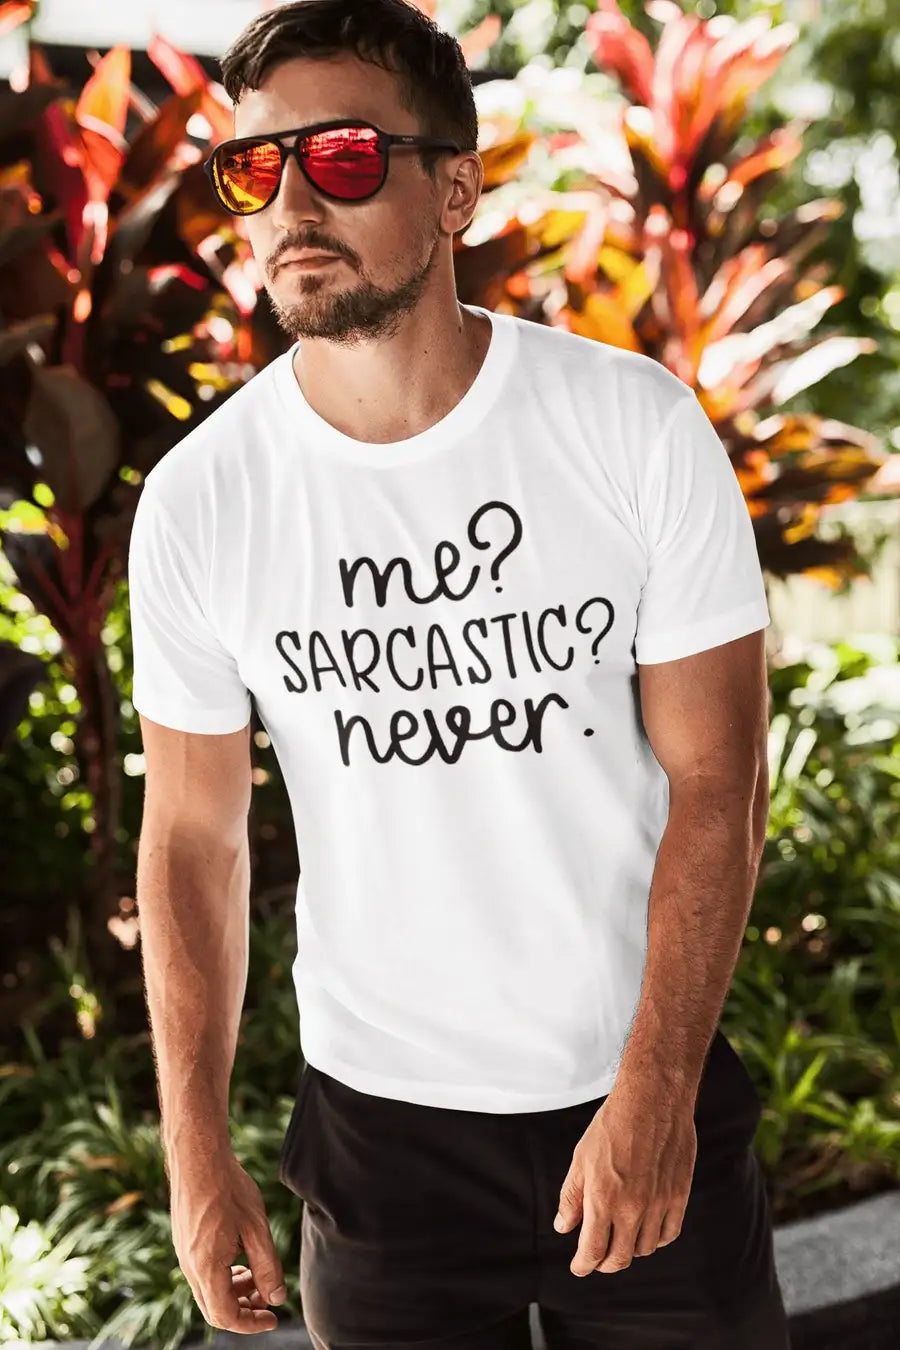 Buy Sarcastic Tshirt Online In India -  India